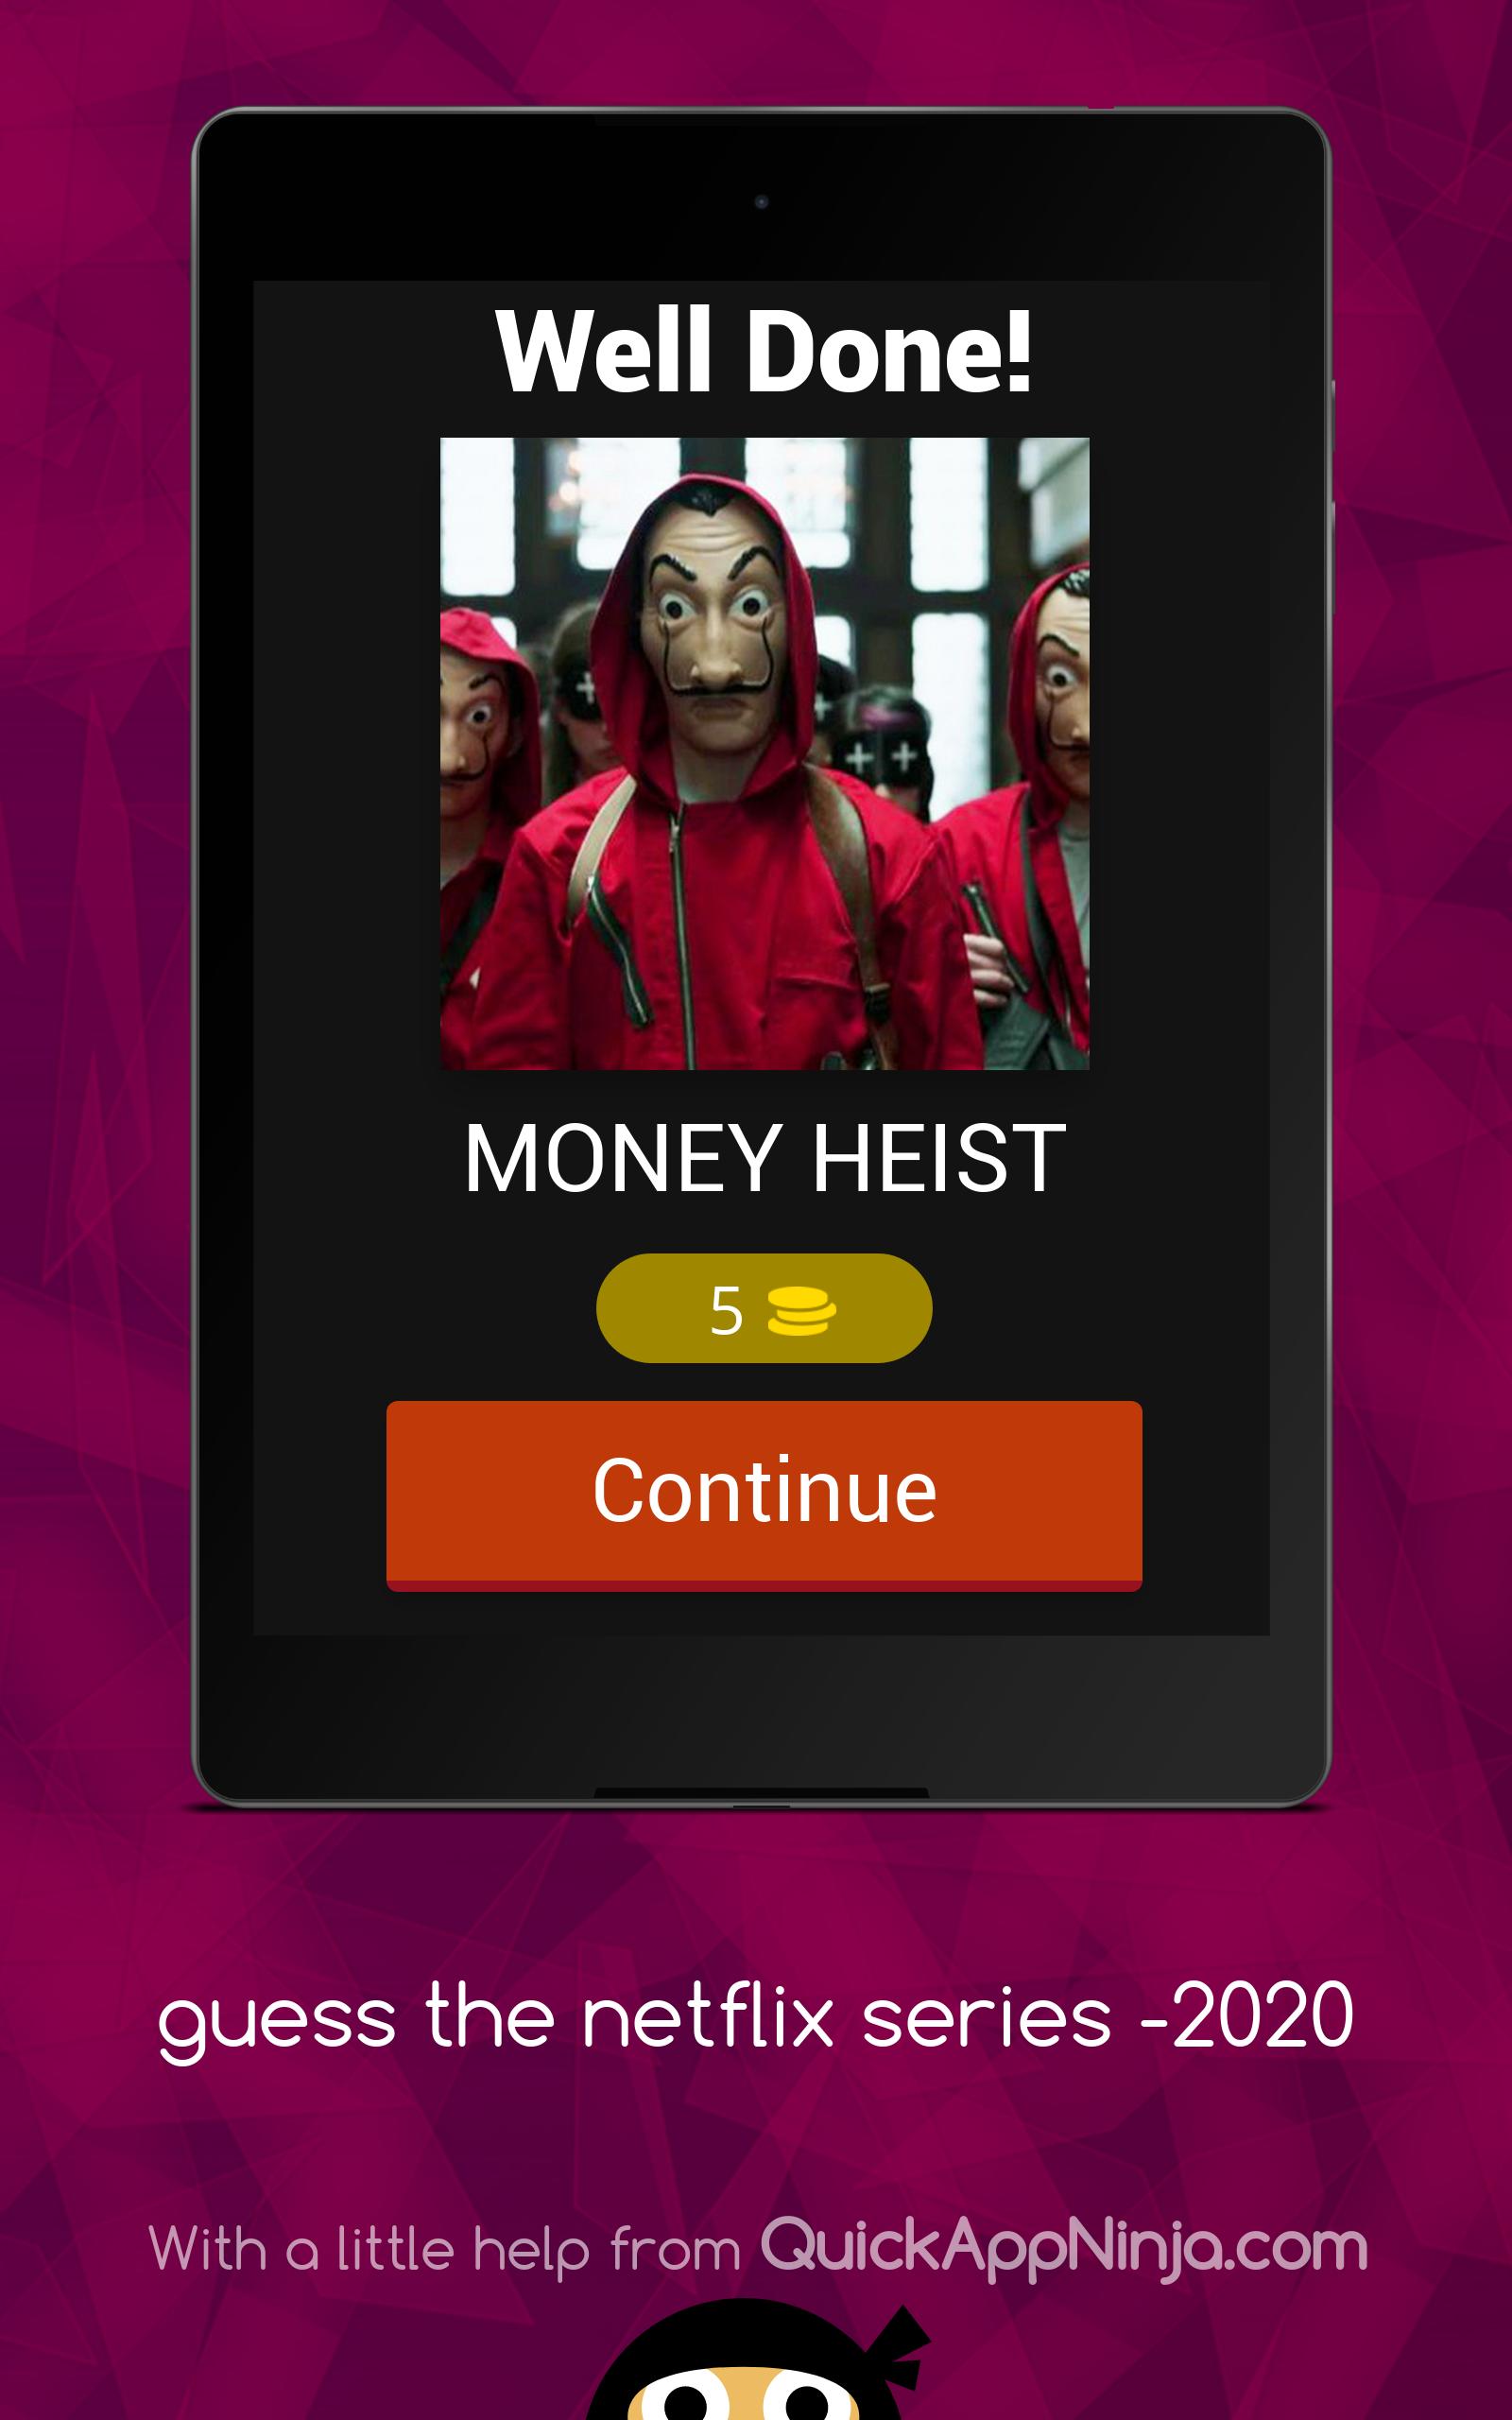 GUESS THE NETFLIX SERIES-2020 for Android - APK Download